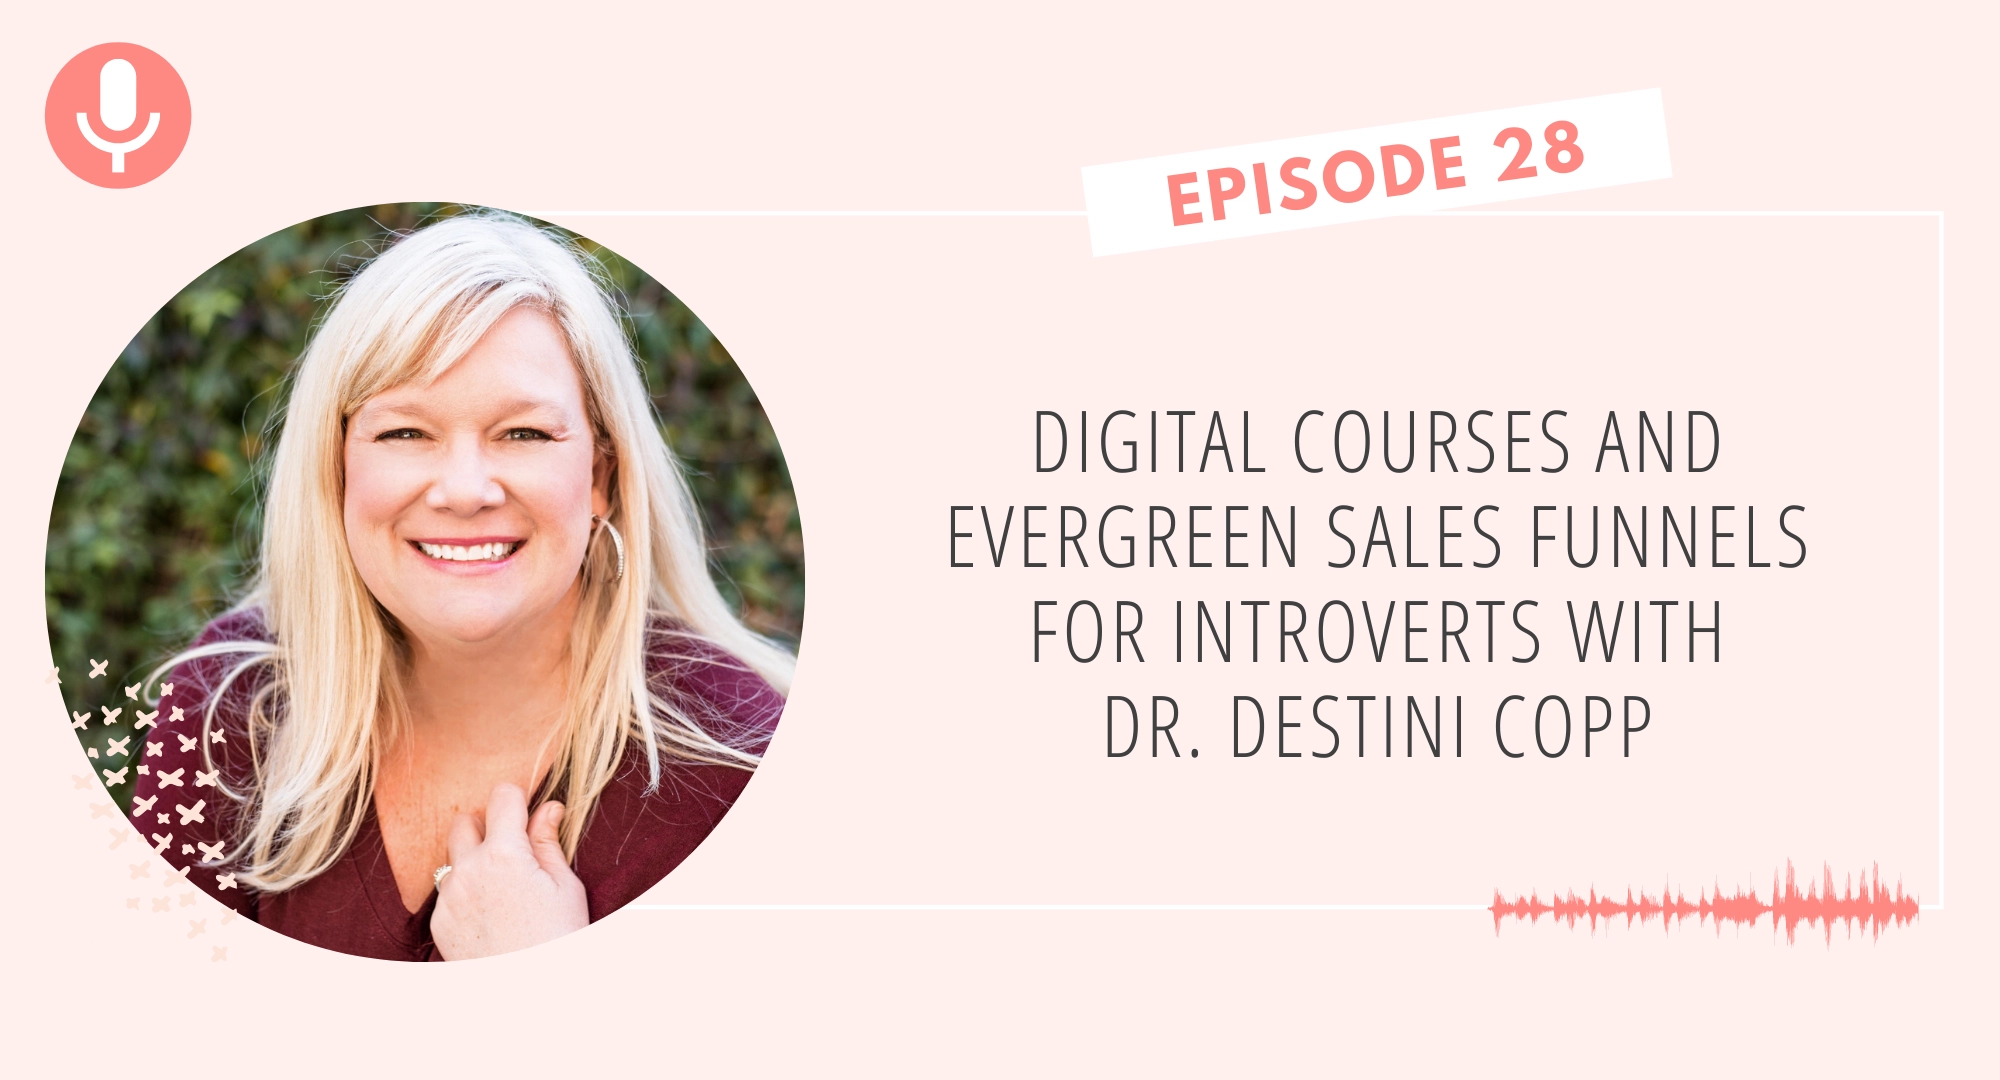 Digital Courses and Evergreen Sales Funnels for Introverts with Dr. Destini Copp